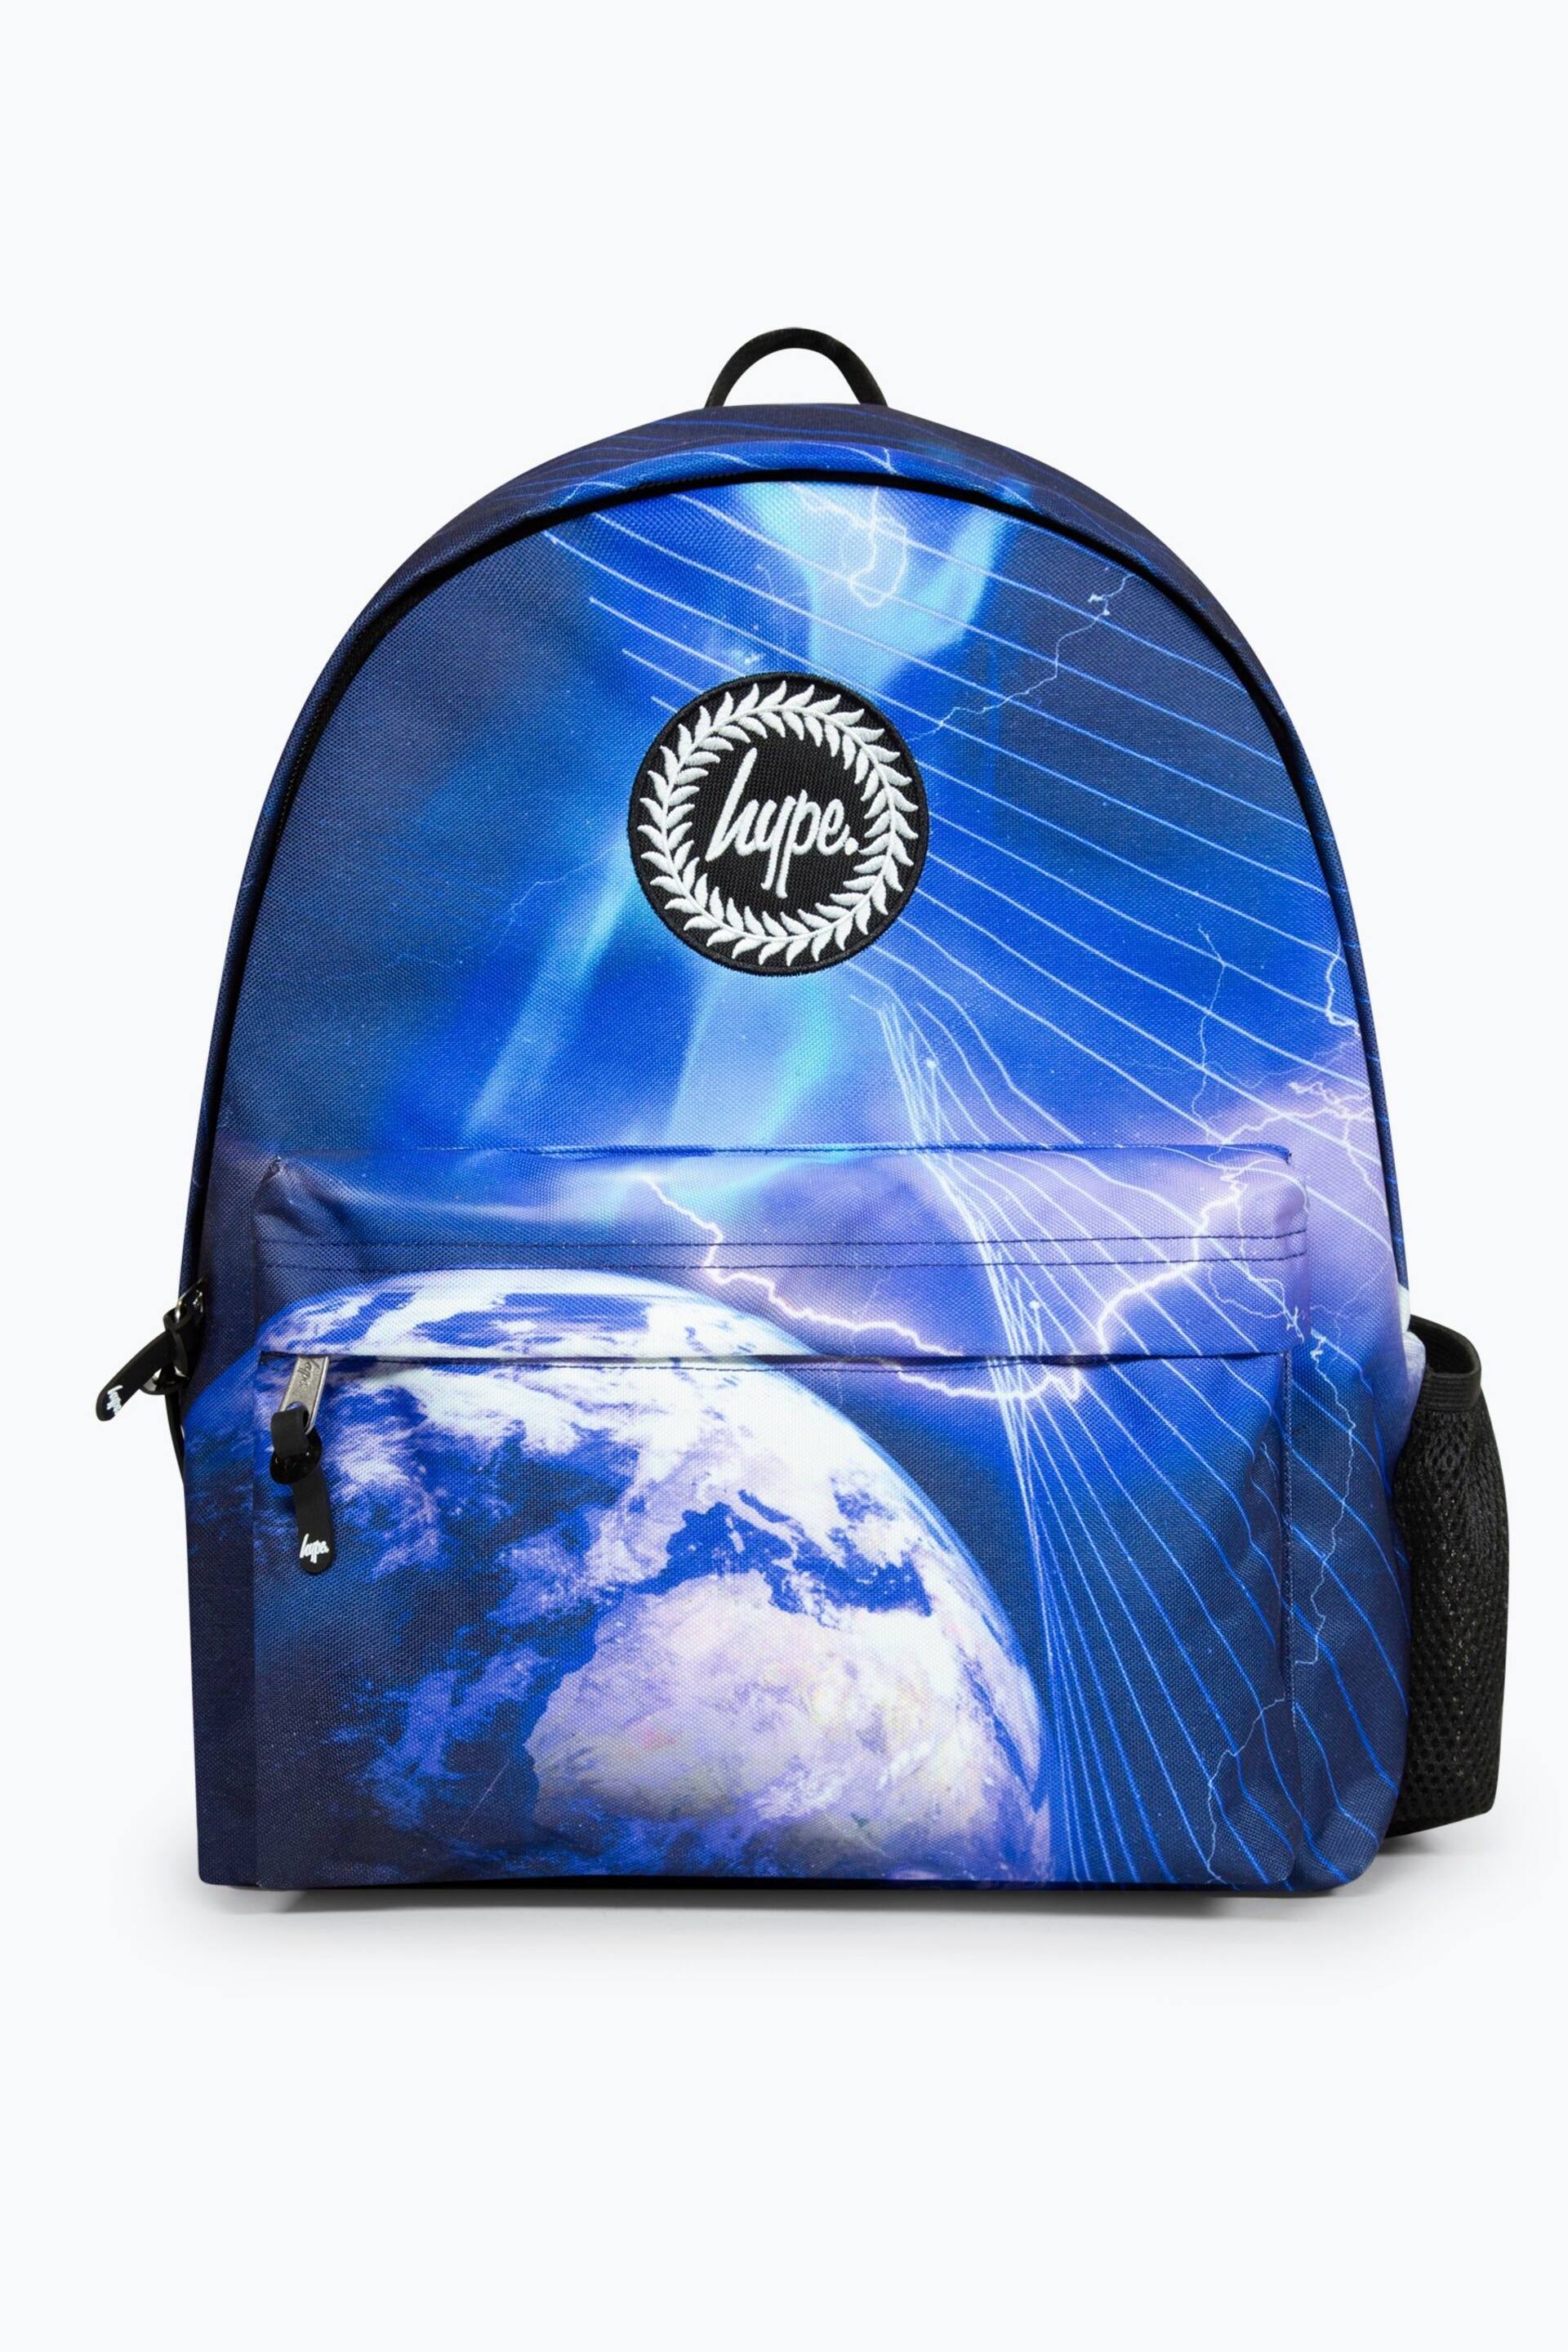 Hype. Space Storm V2 Badge Backpack - Image 1 of 10